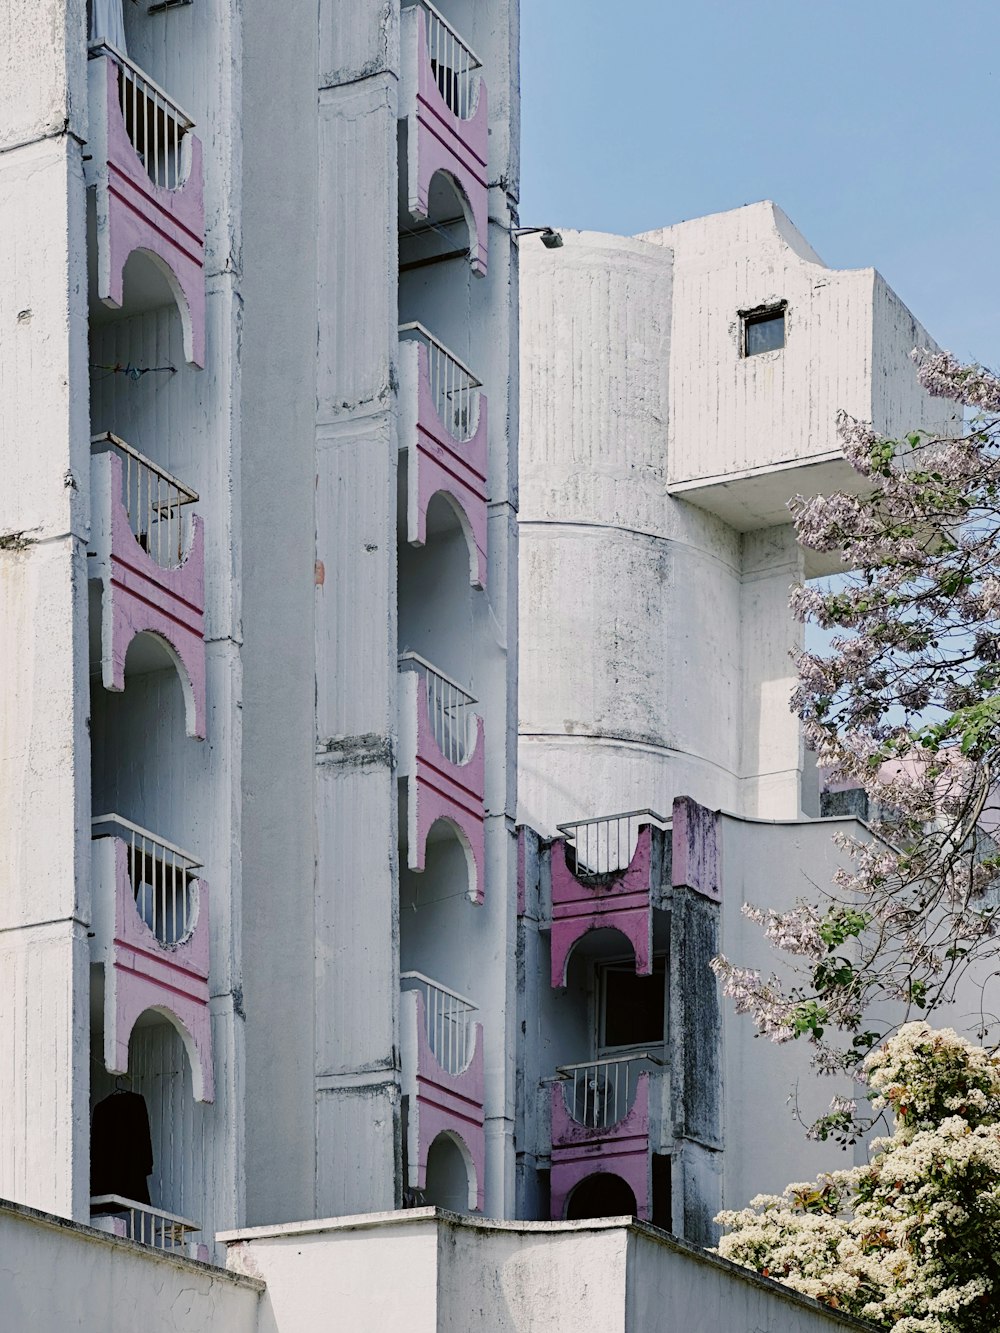 a tall building with balconies and balconies painted pink